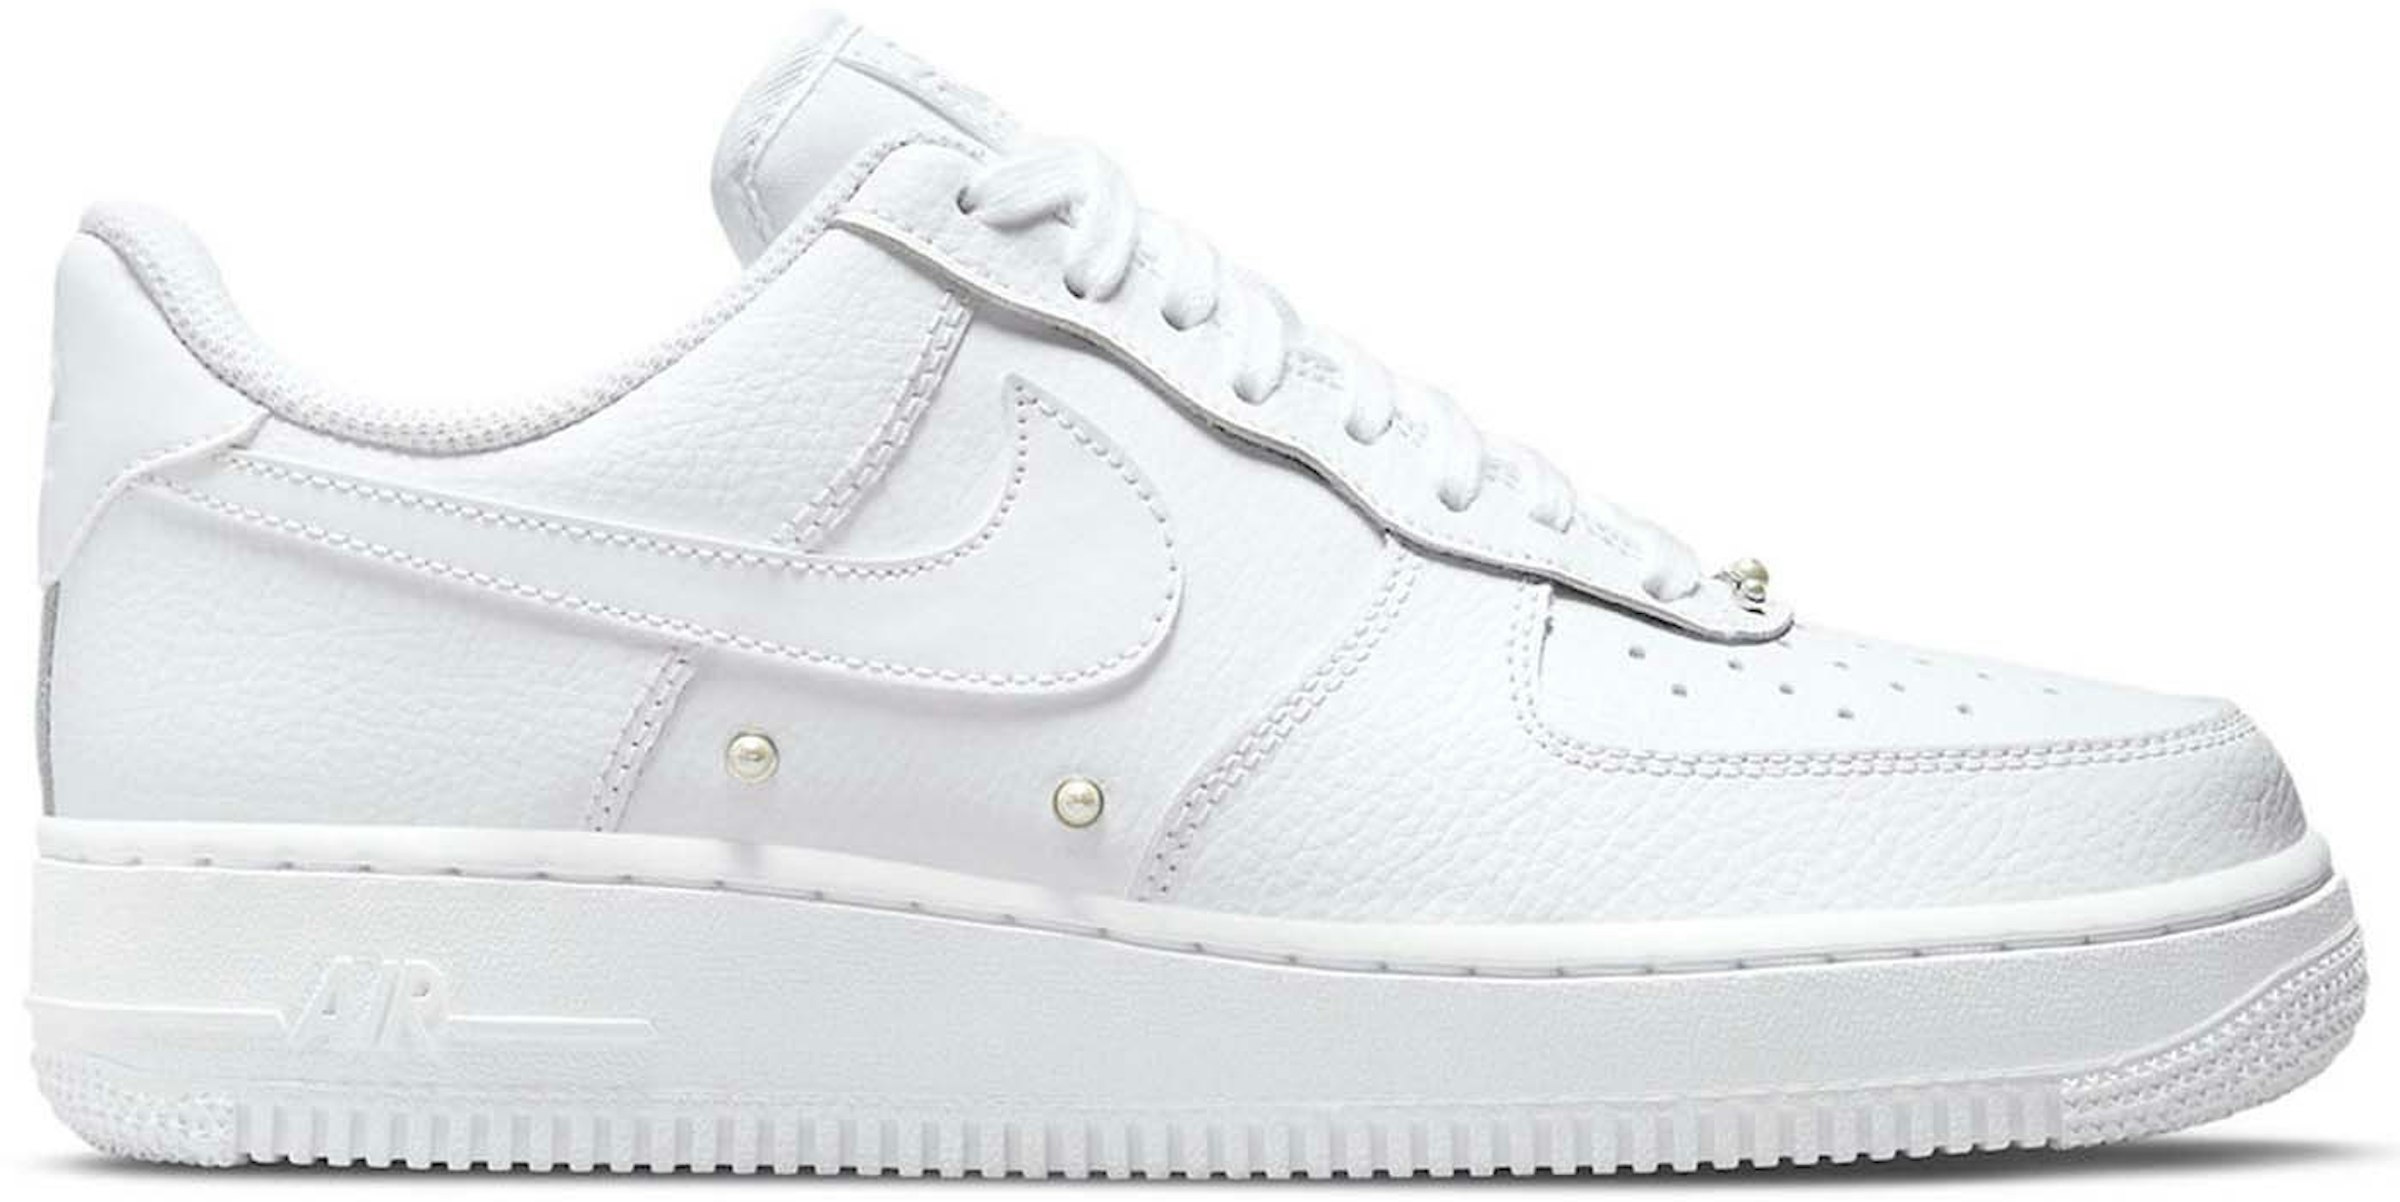 Air Force 1 Low '07 SE Pearl White (Women's) - DQ0231-100 - US